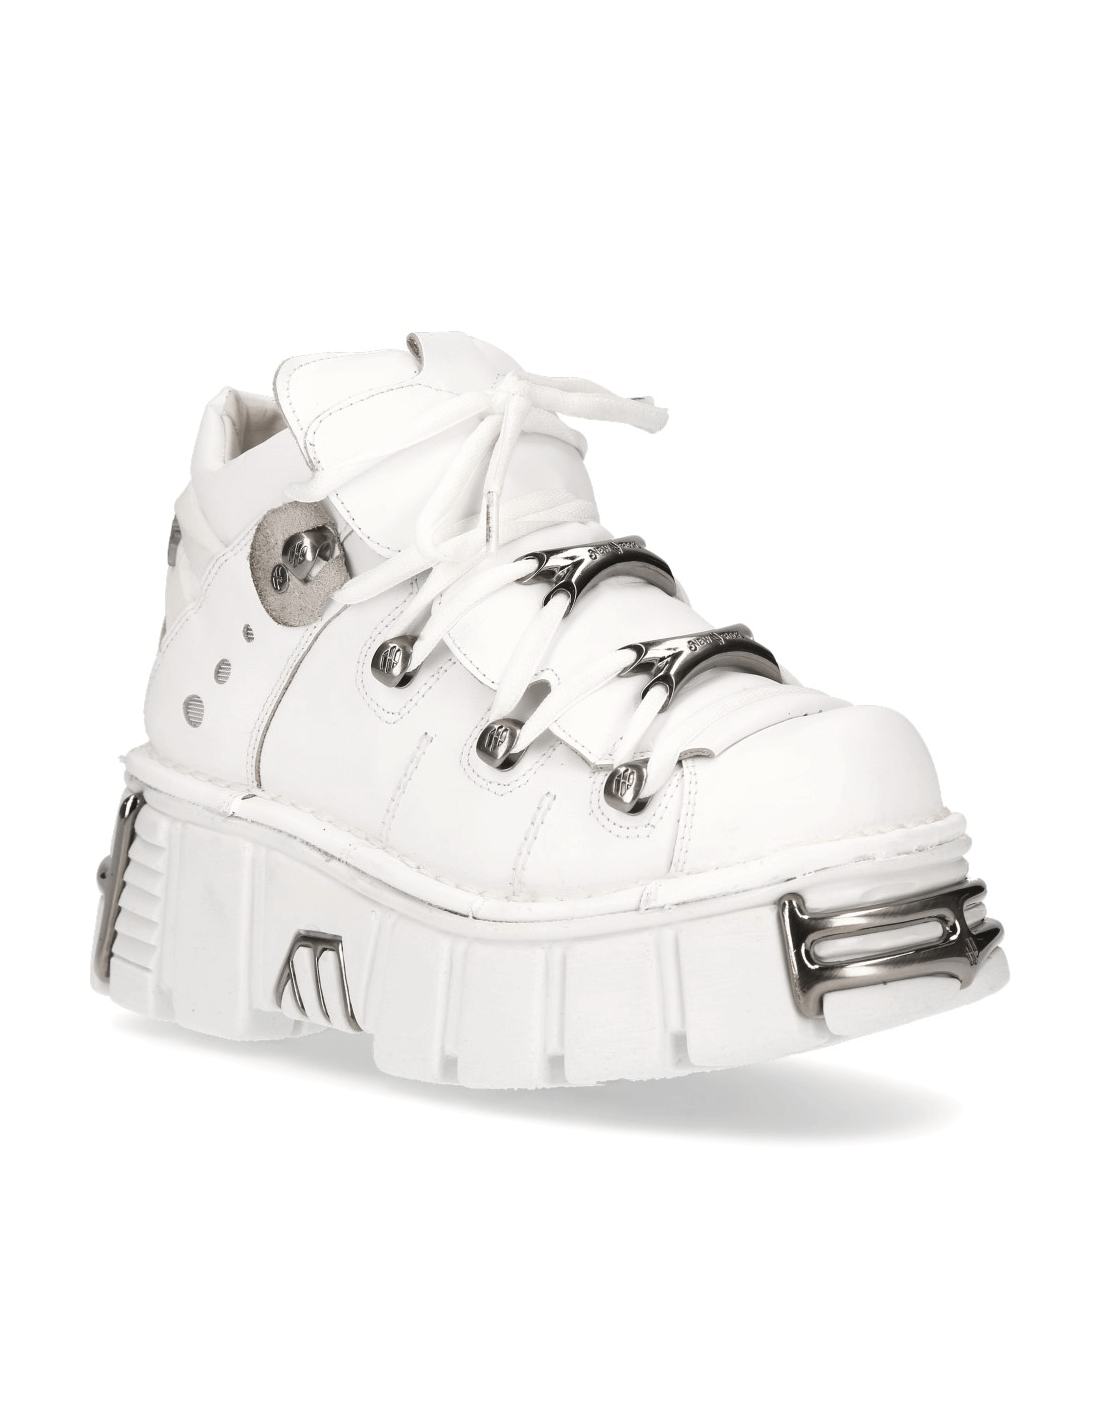 NEW ROCK White Tower Ankle Boots with Rocker Flair